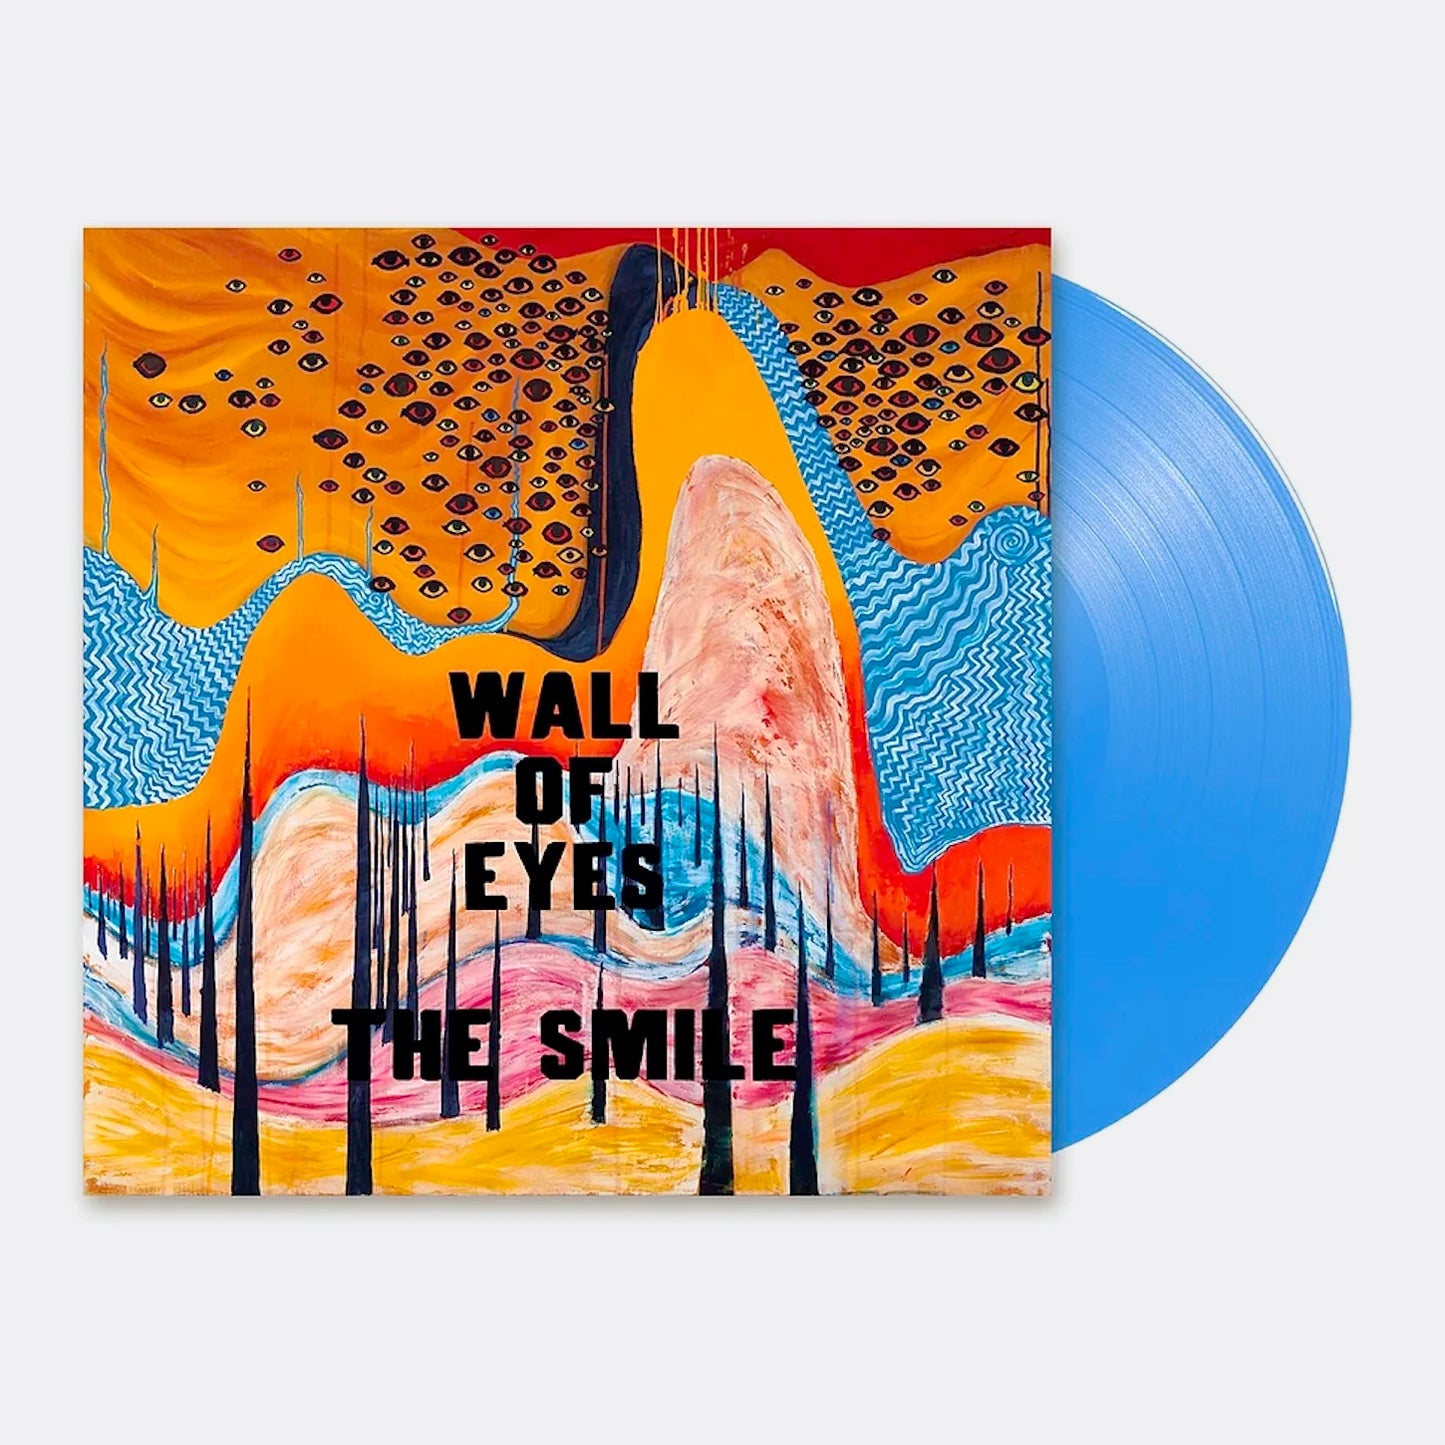 Load image into Gallery viewer, The Smile - Wall Of Eyes. LP [Ltd. Ed. Blue Vinyl]
